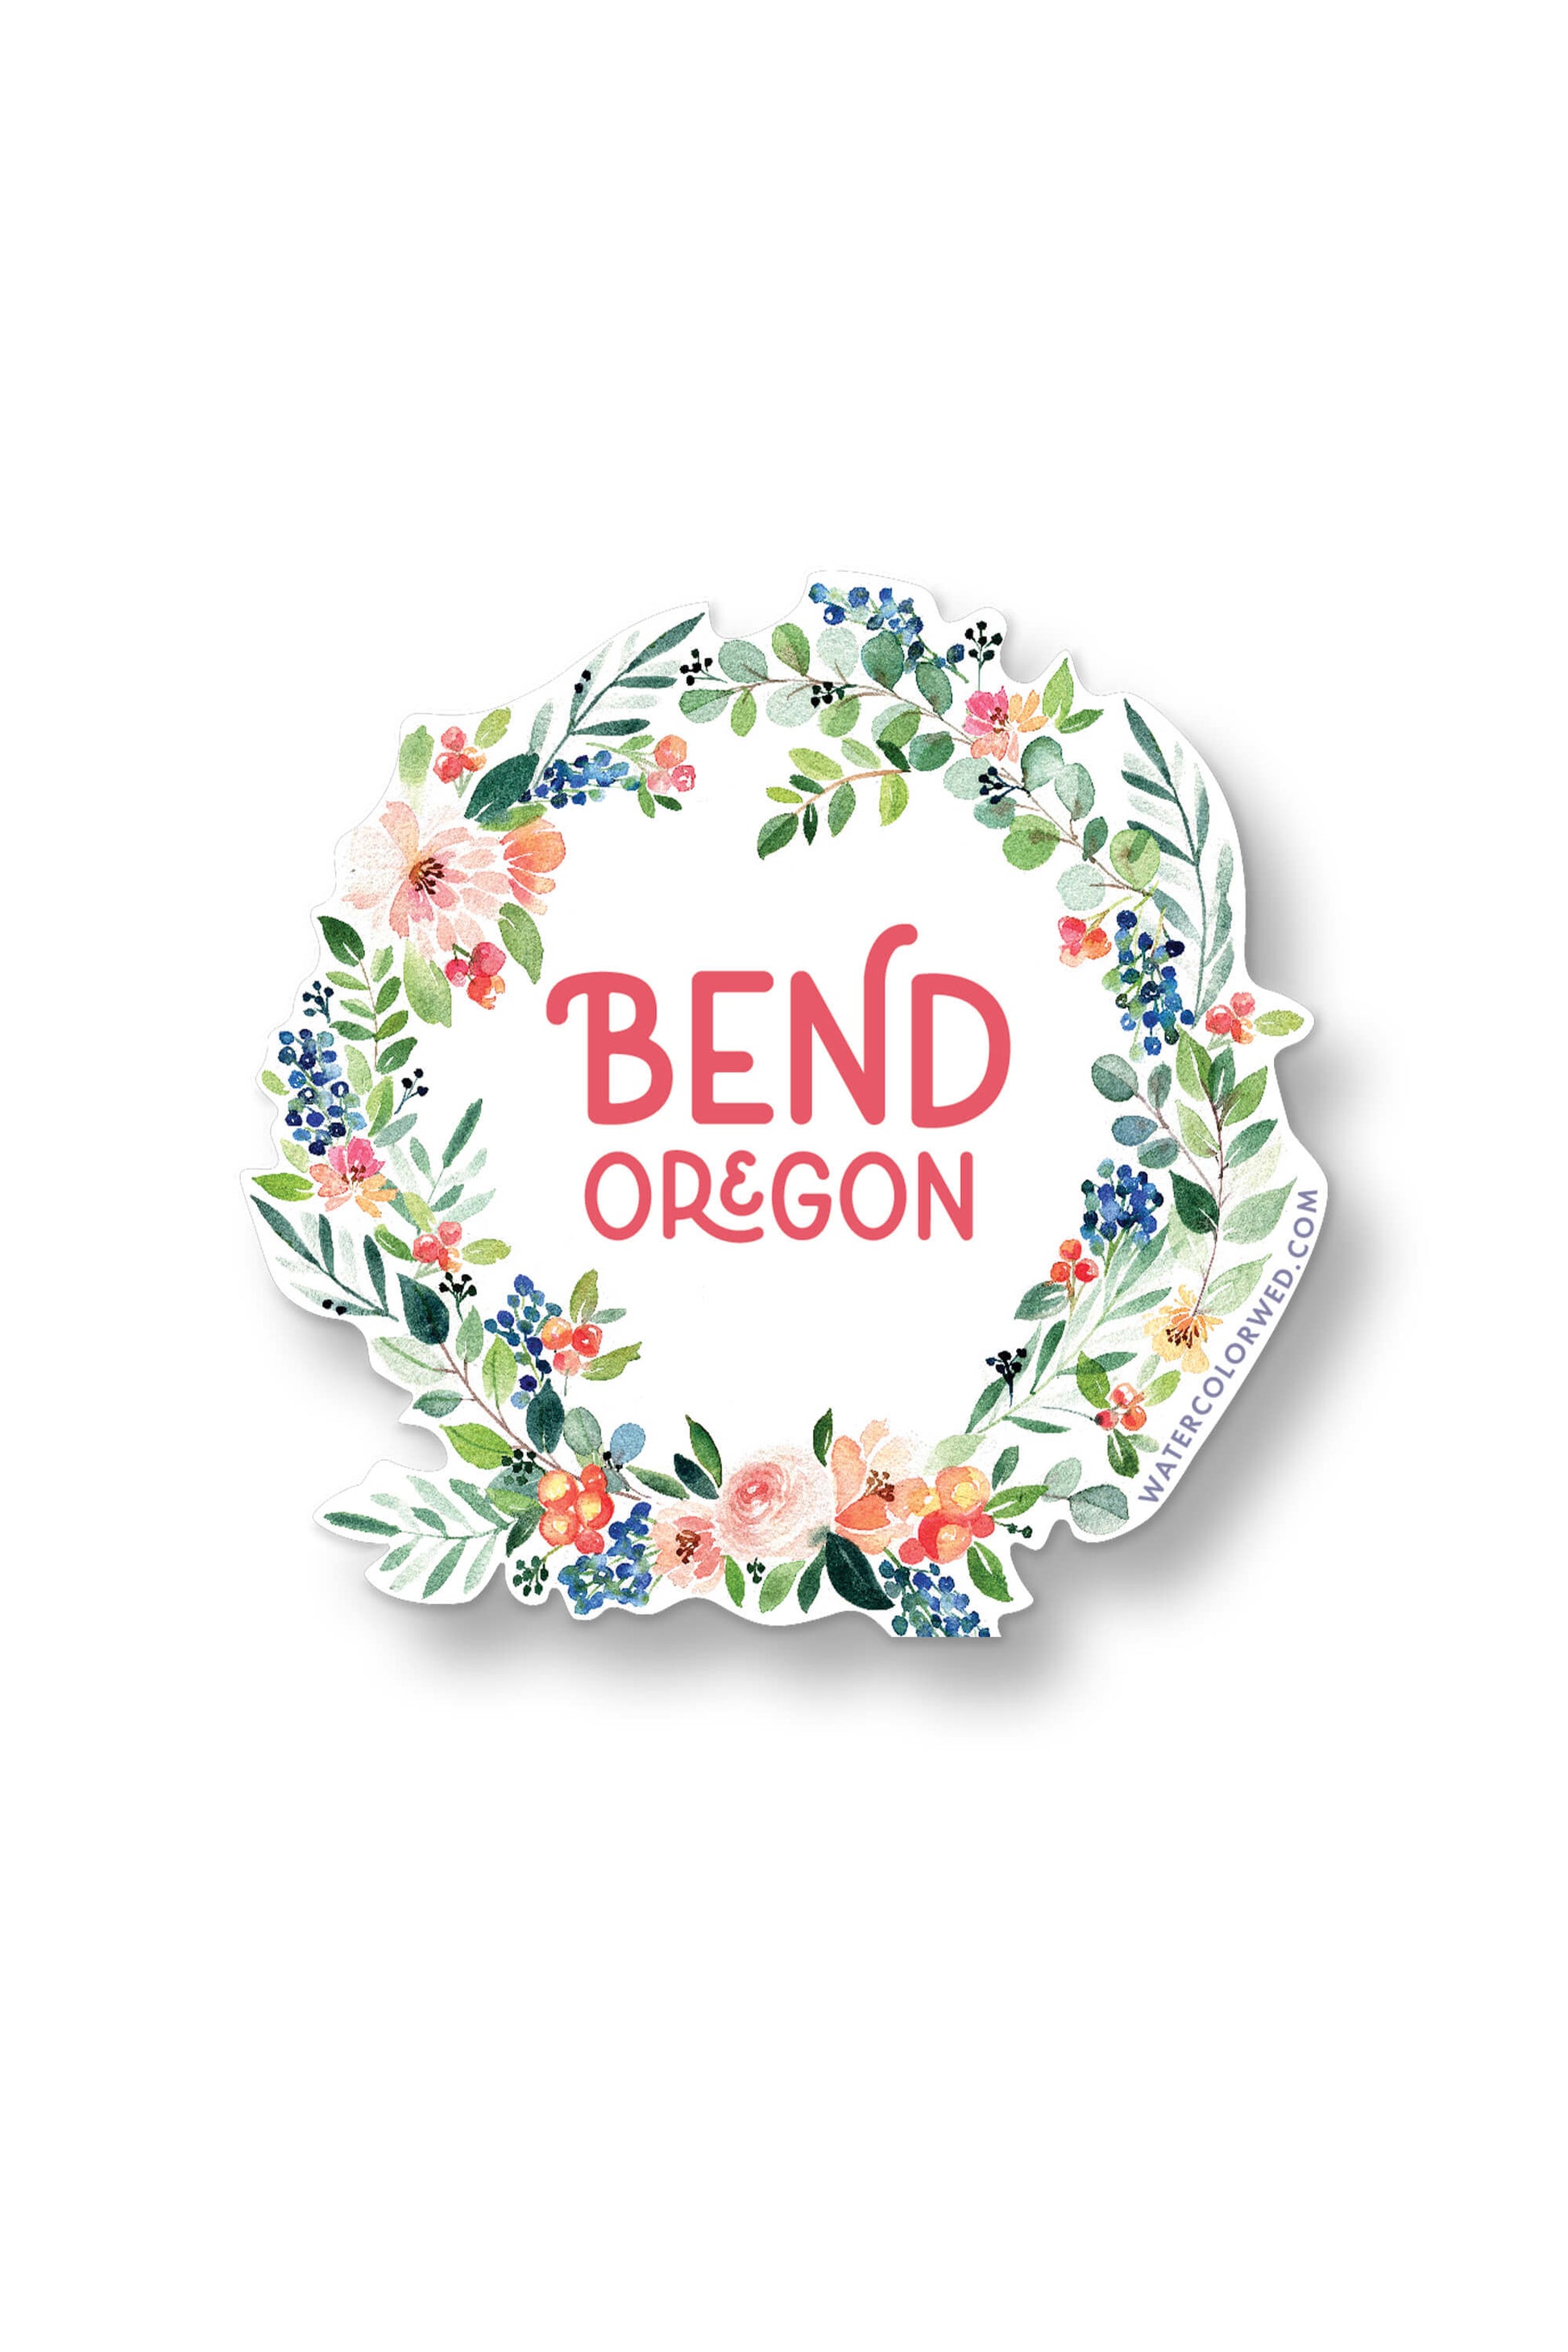 a sticker that says bend oregon surrounded by flowers